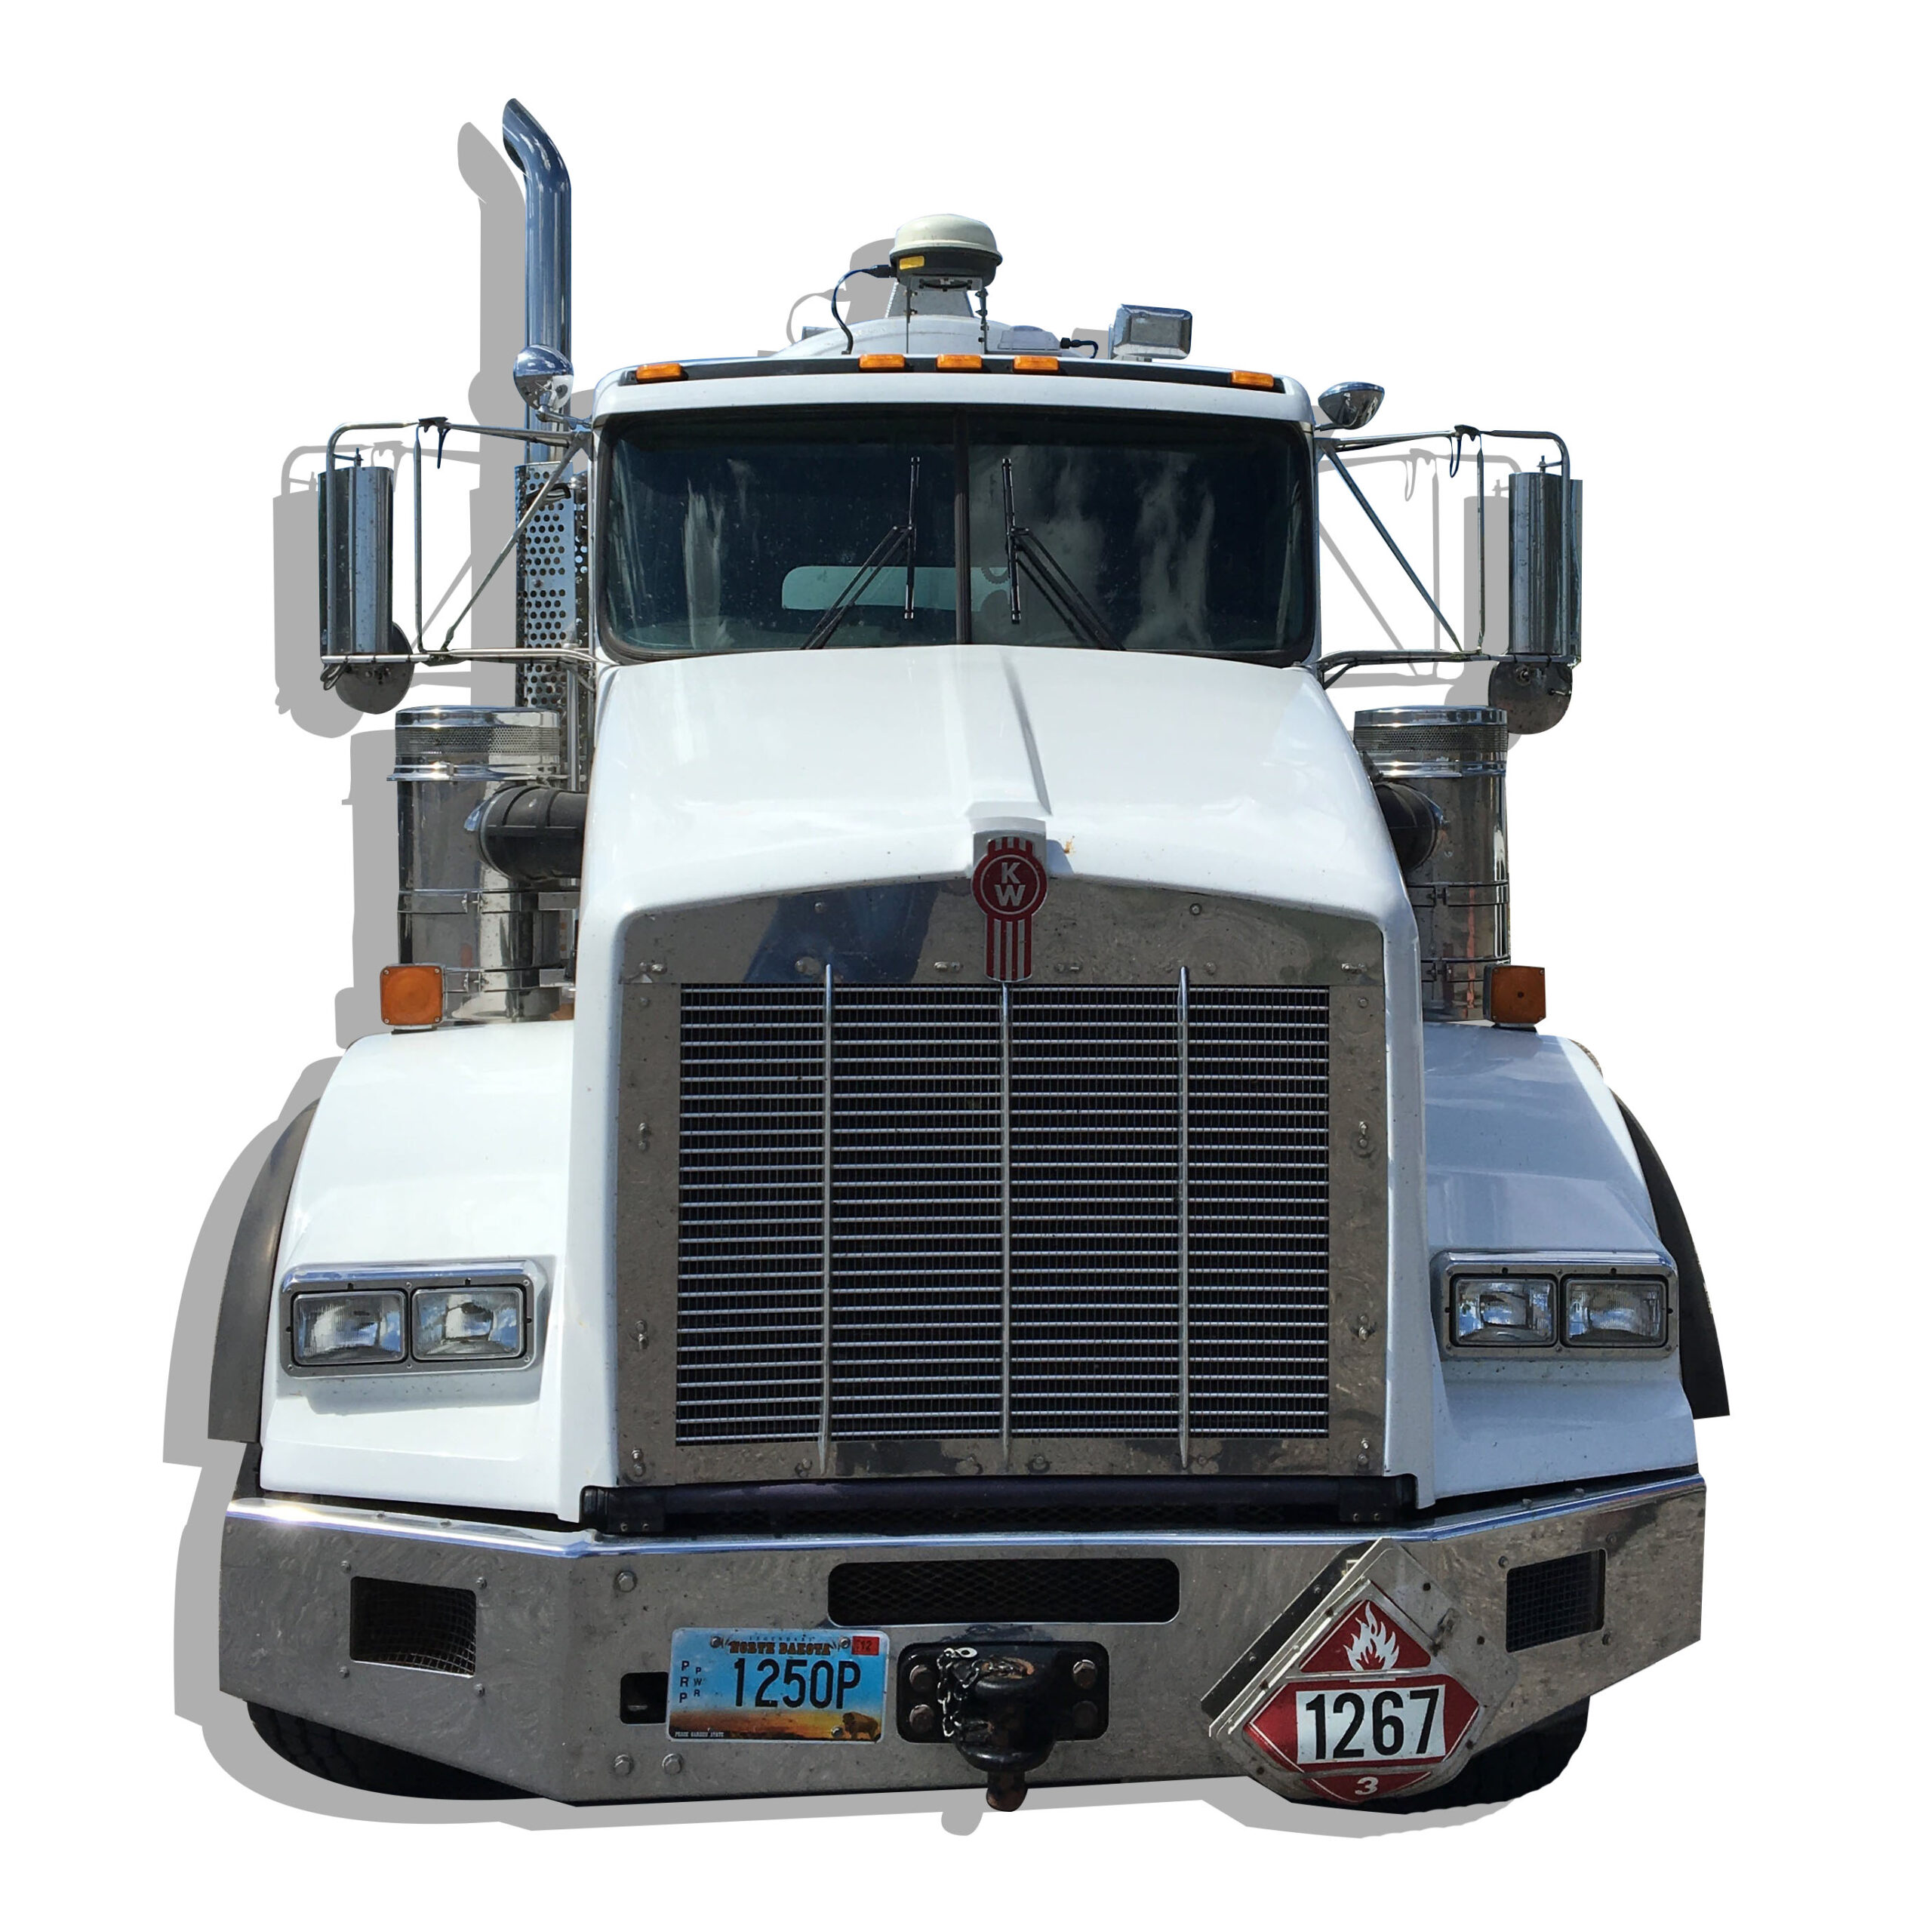 https://rmcrudeoil.com/wp-content/uploads/2021/09/truck-front-rmco-scaled.jpg